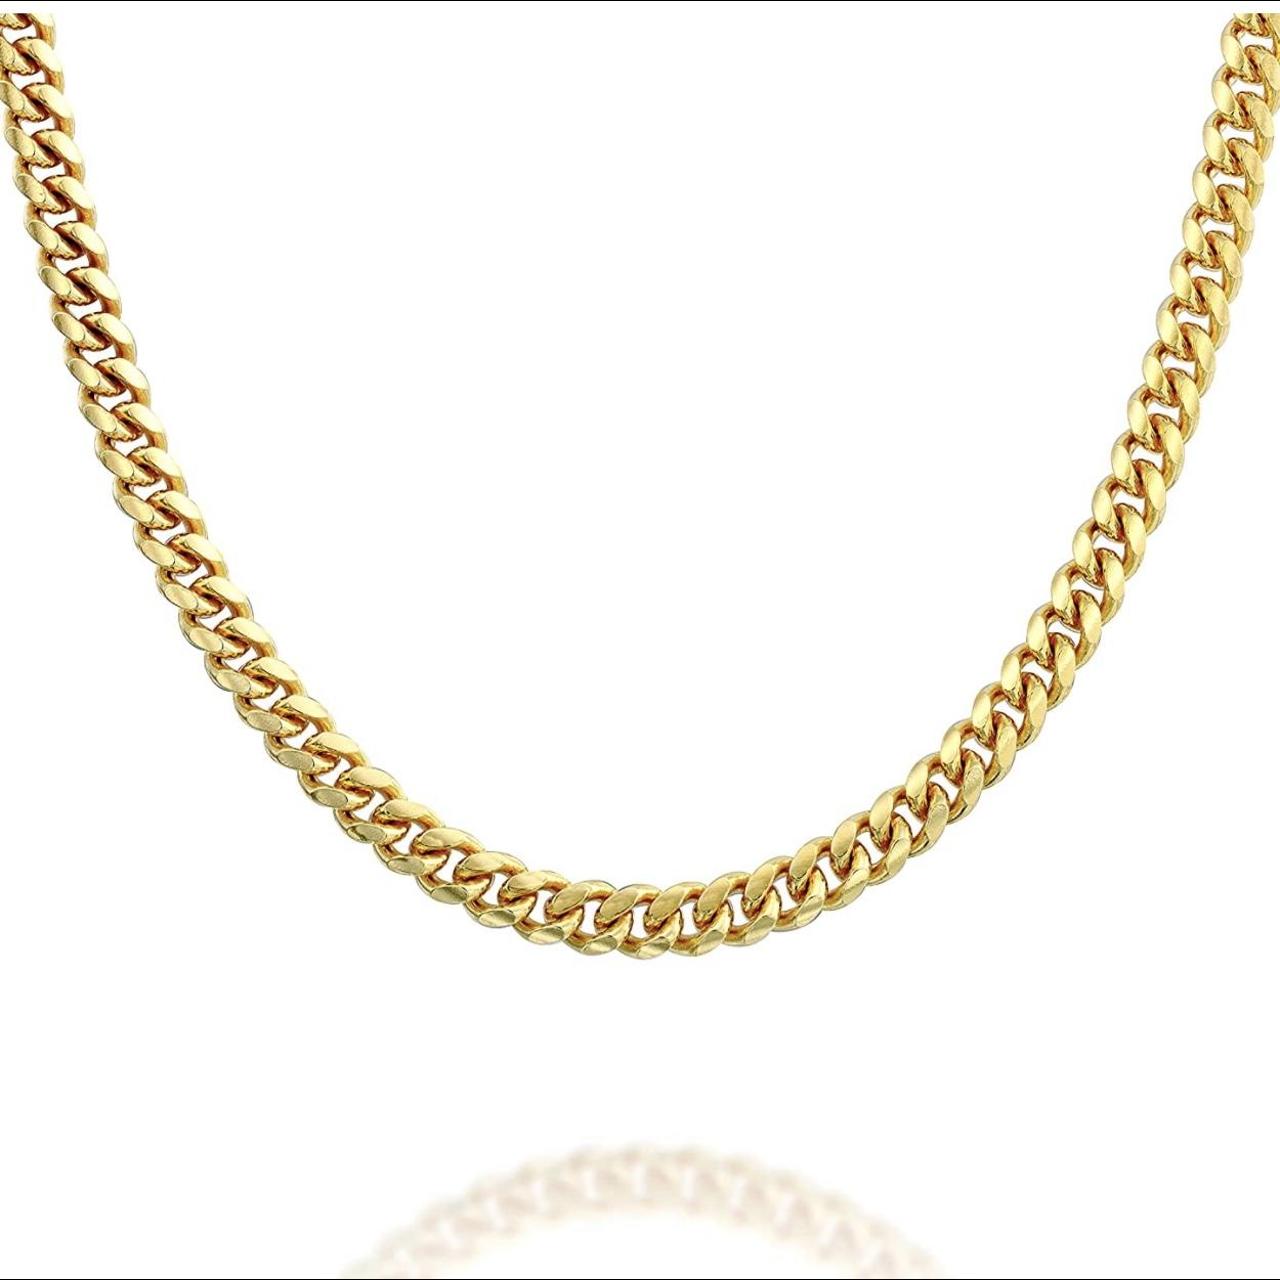 Freshwater Chain Gold Necklace for Women by PAVOI